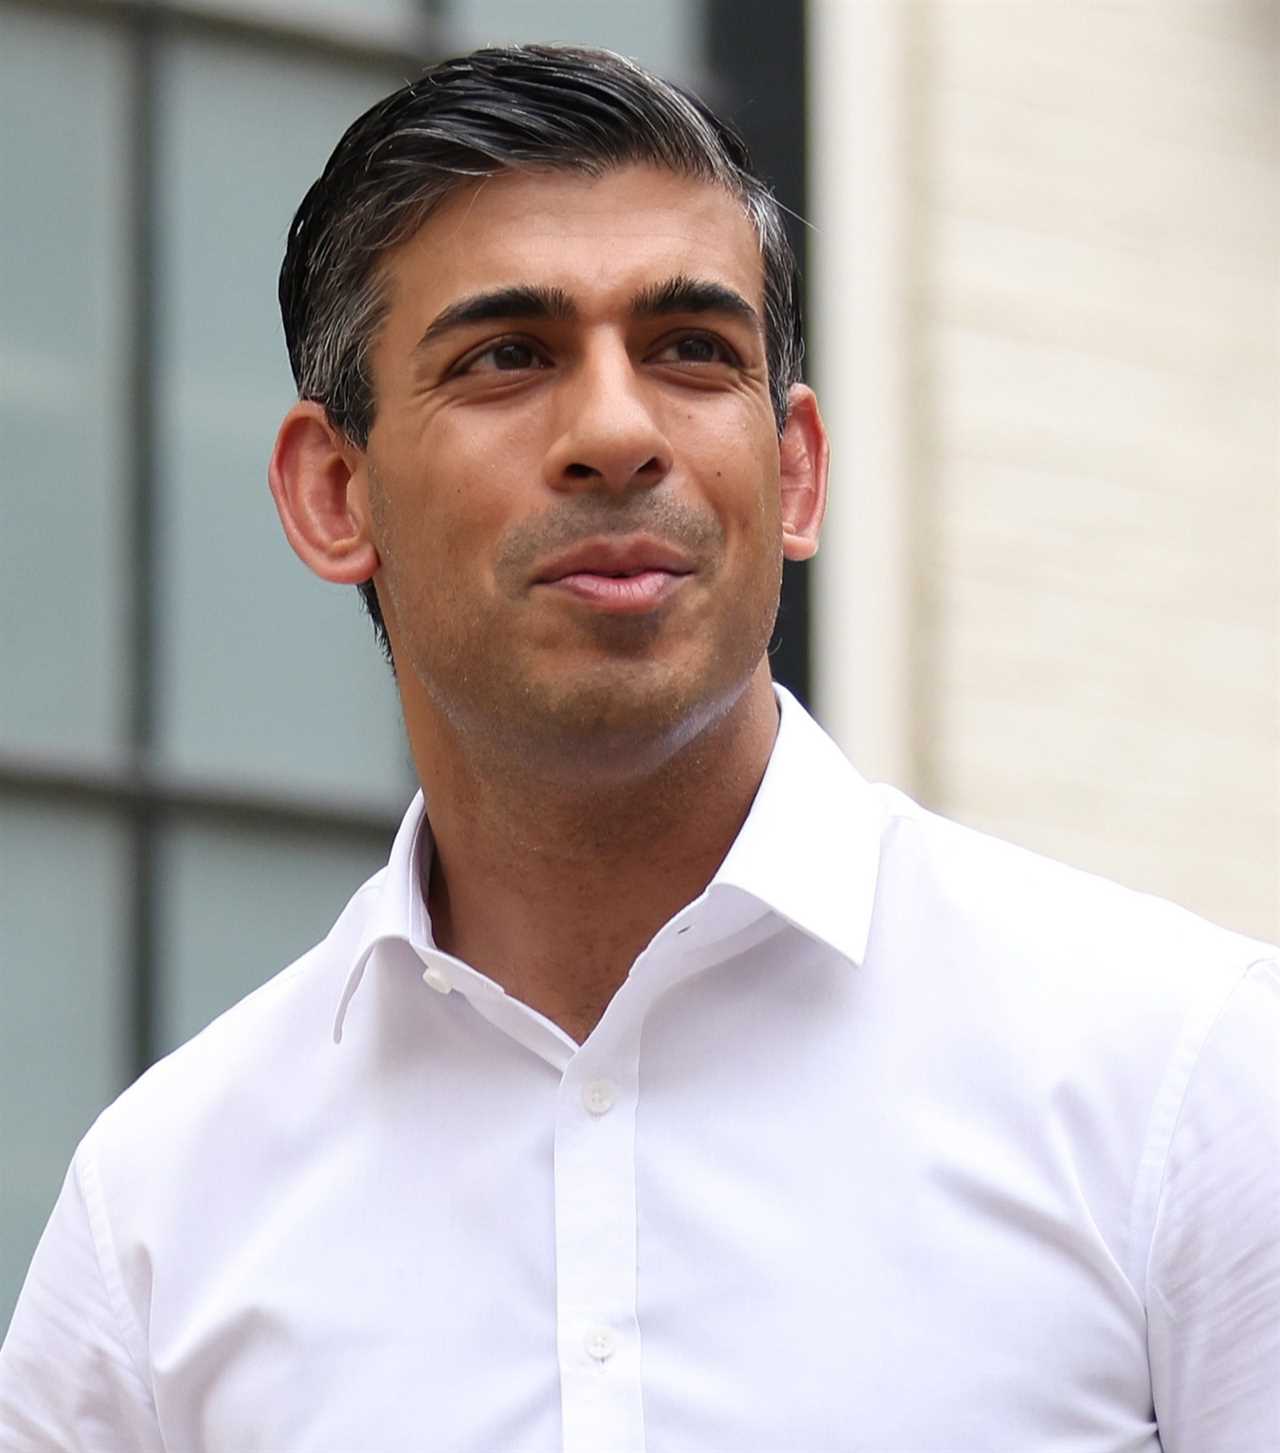 Rishi Sunak could join up with Kemi Badenoch as ‘Kishi’ dream team in Tory leadership race, MPs claim